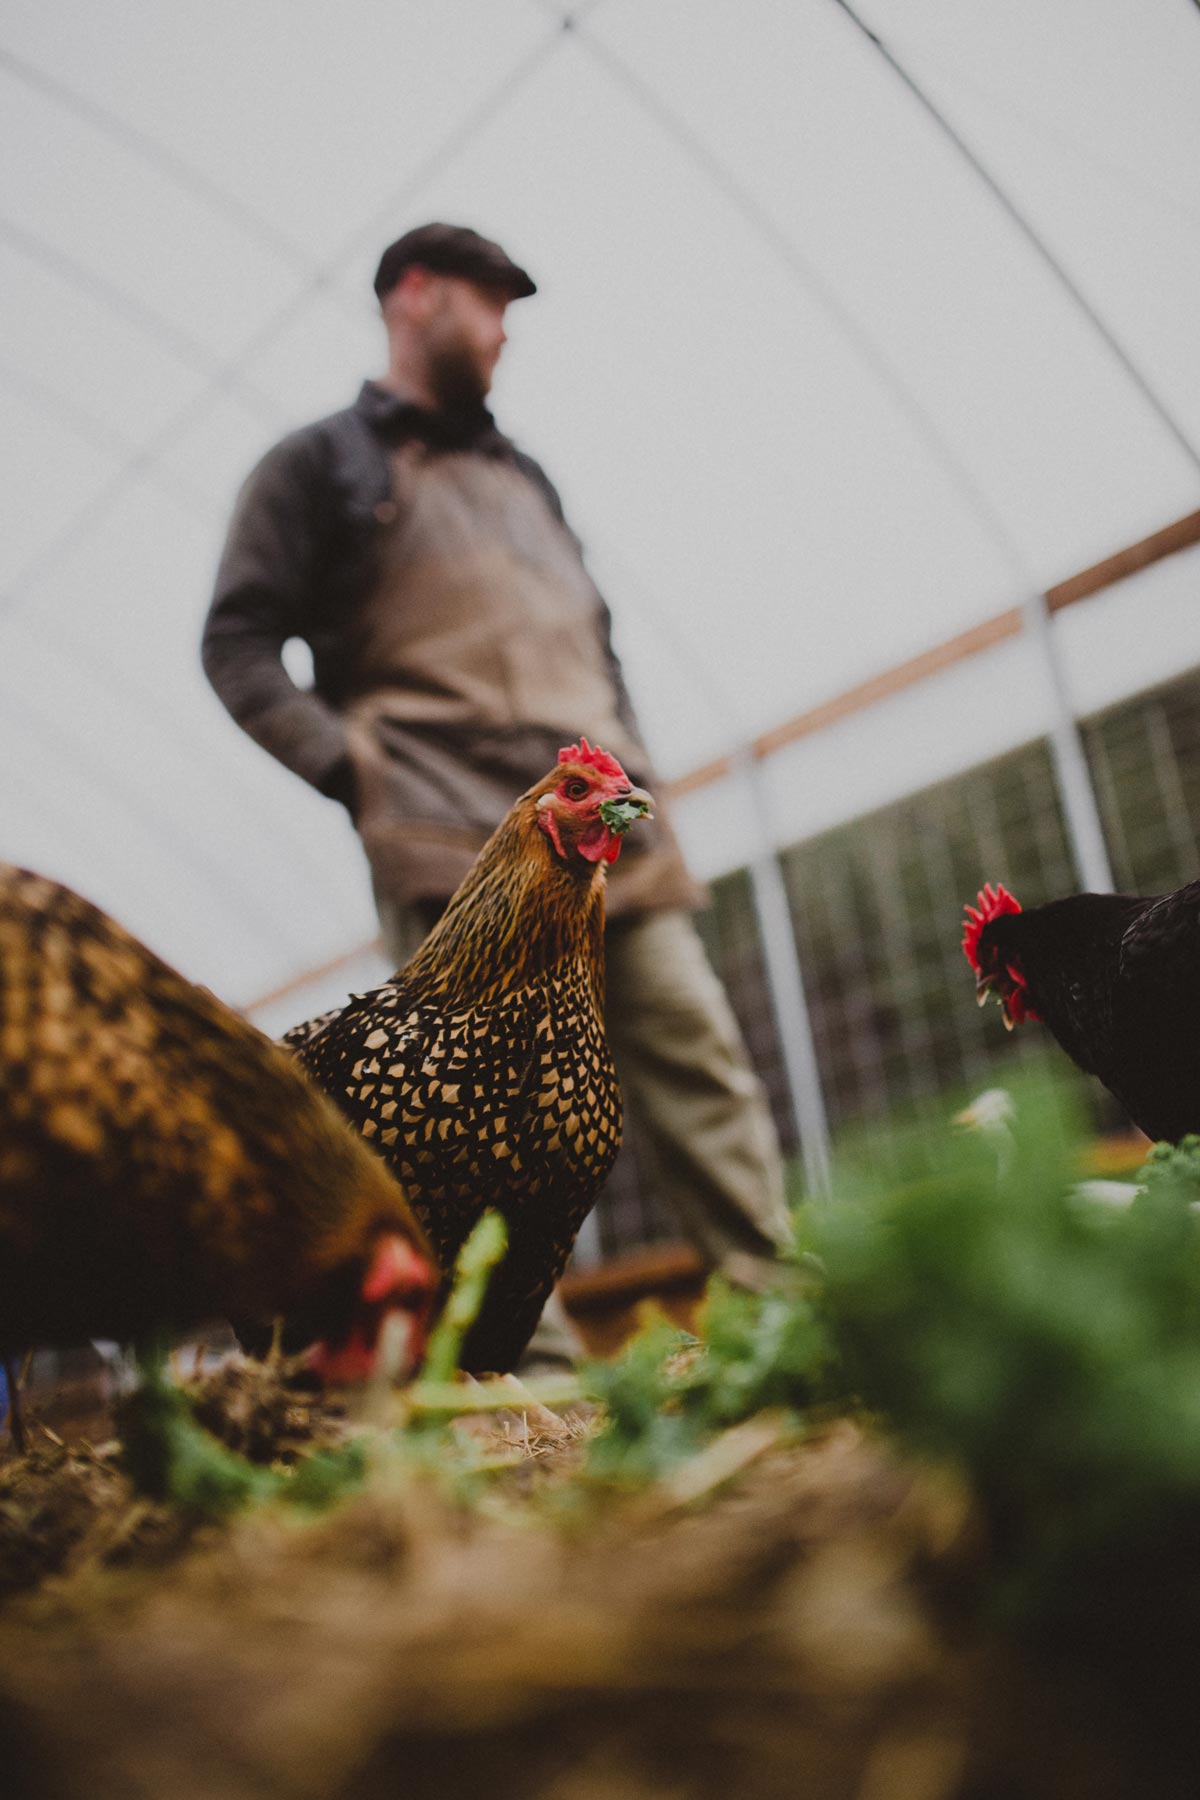 Chickens eating produce in a greenhouse with a man in the background.